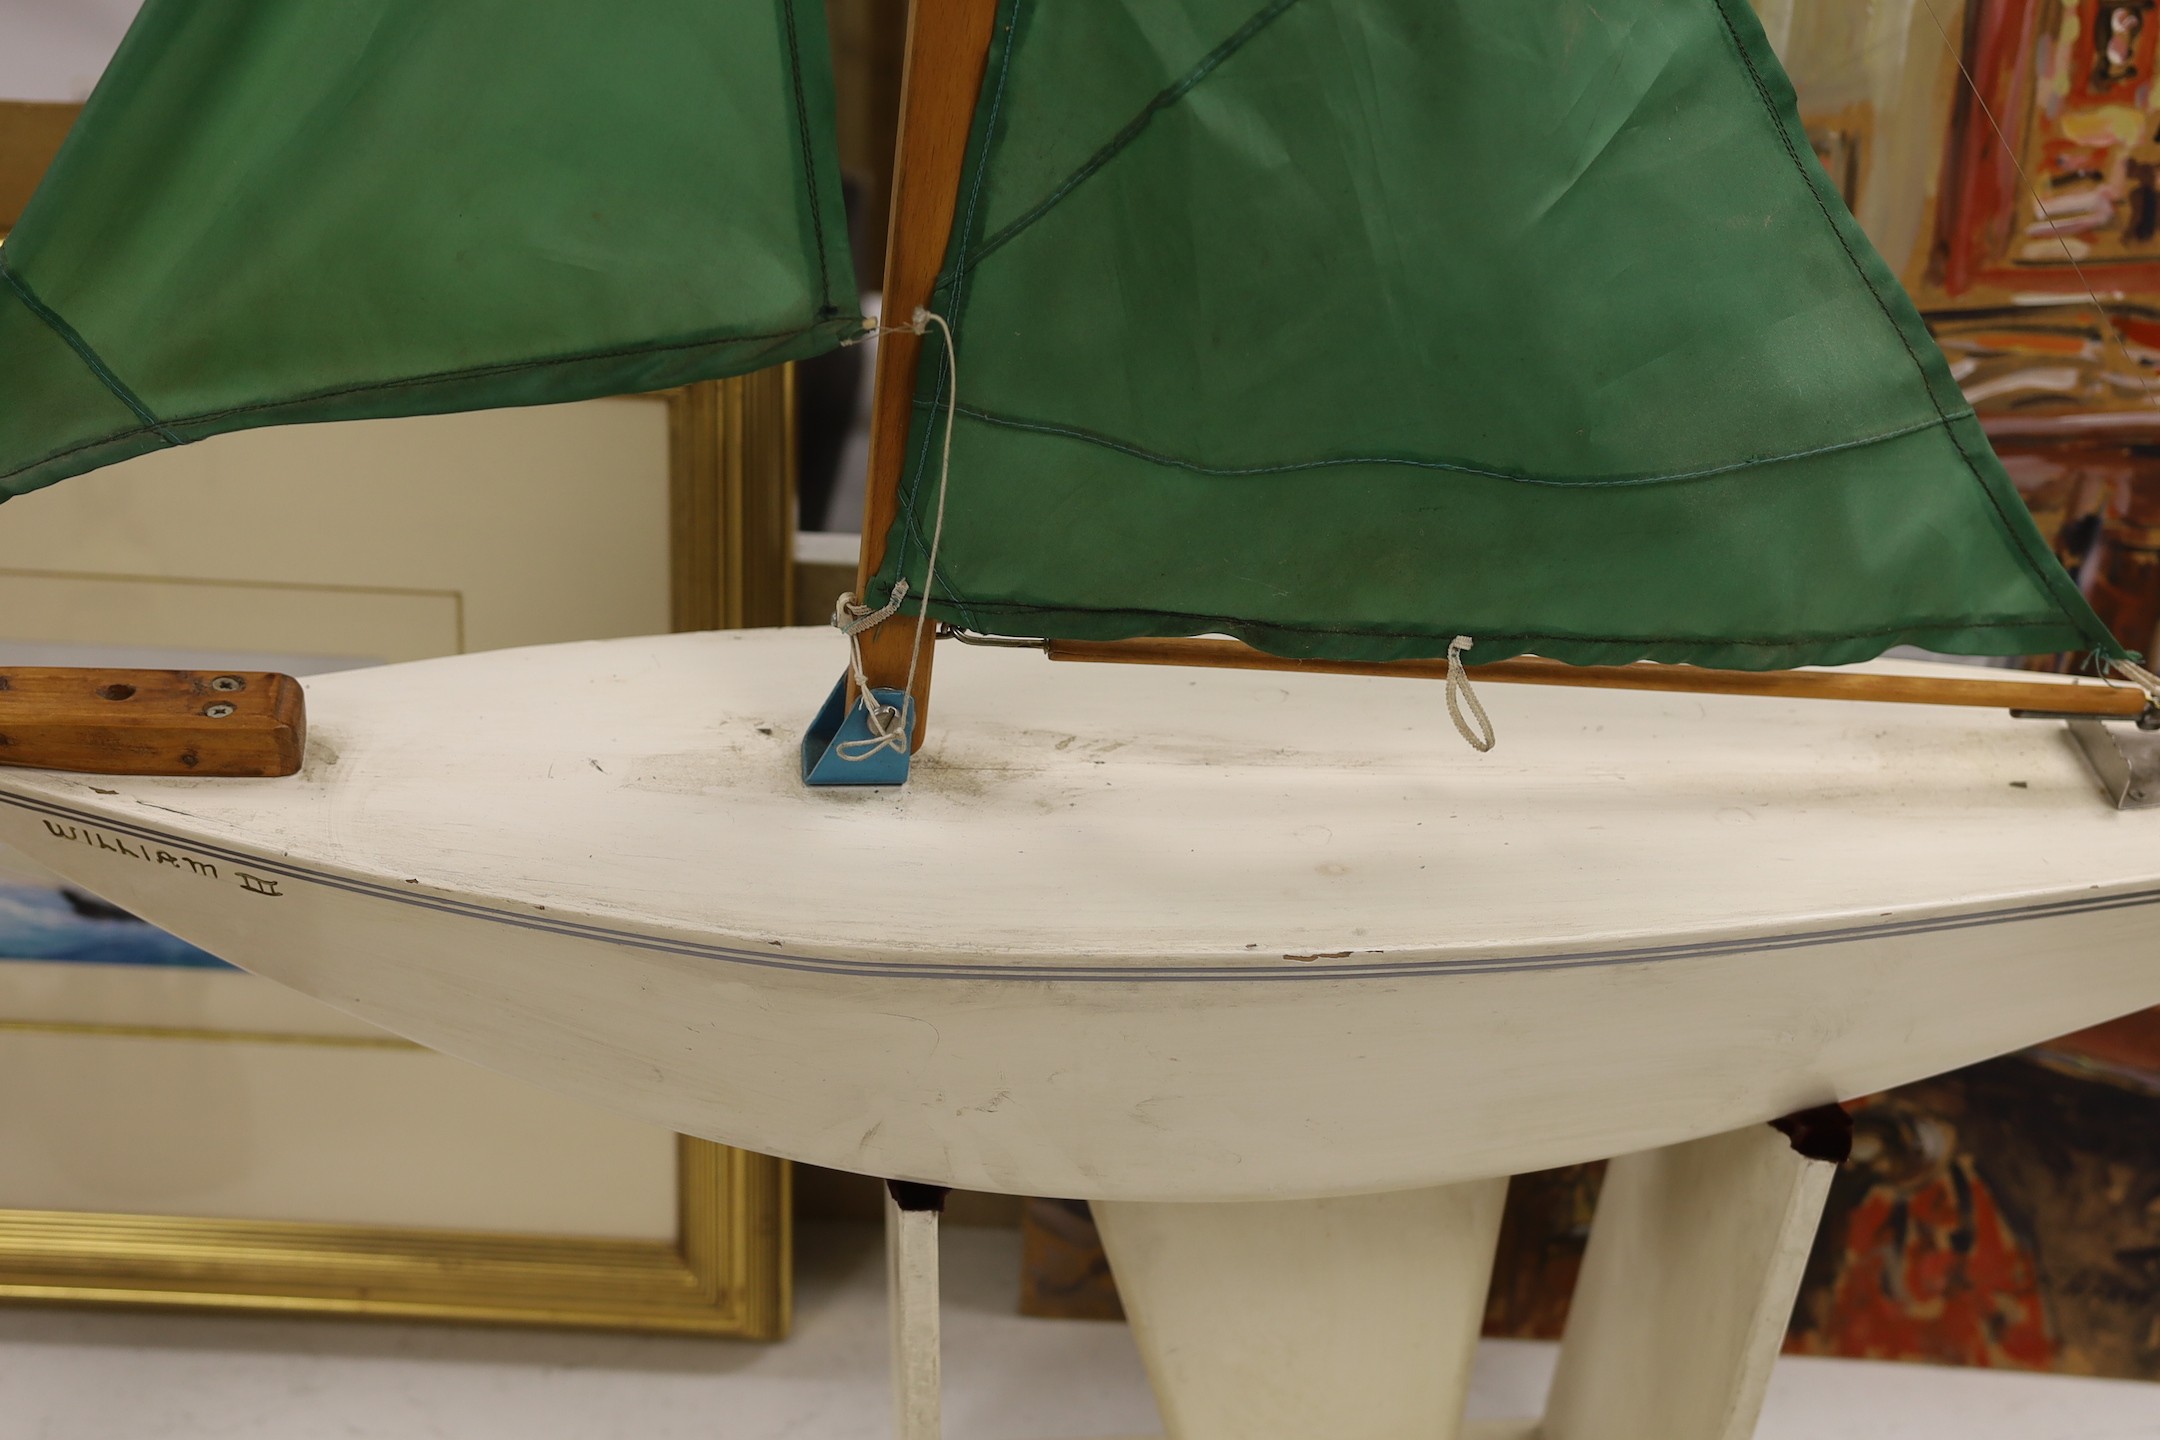 A pond yacht with stand, 100cms wide x 100cms high.